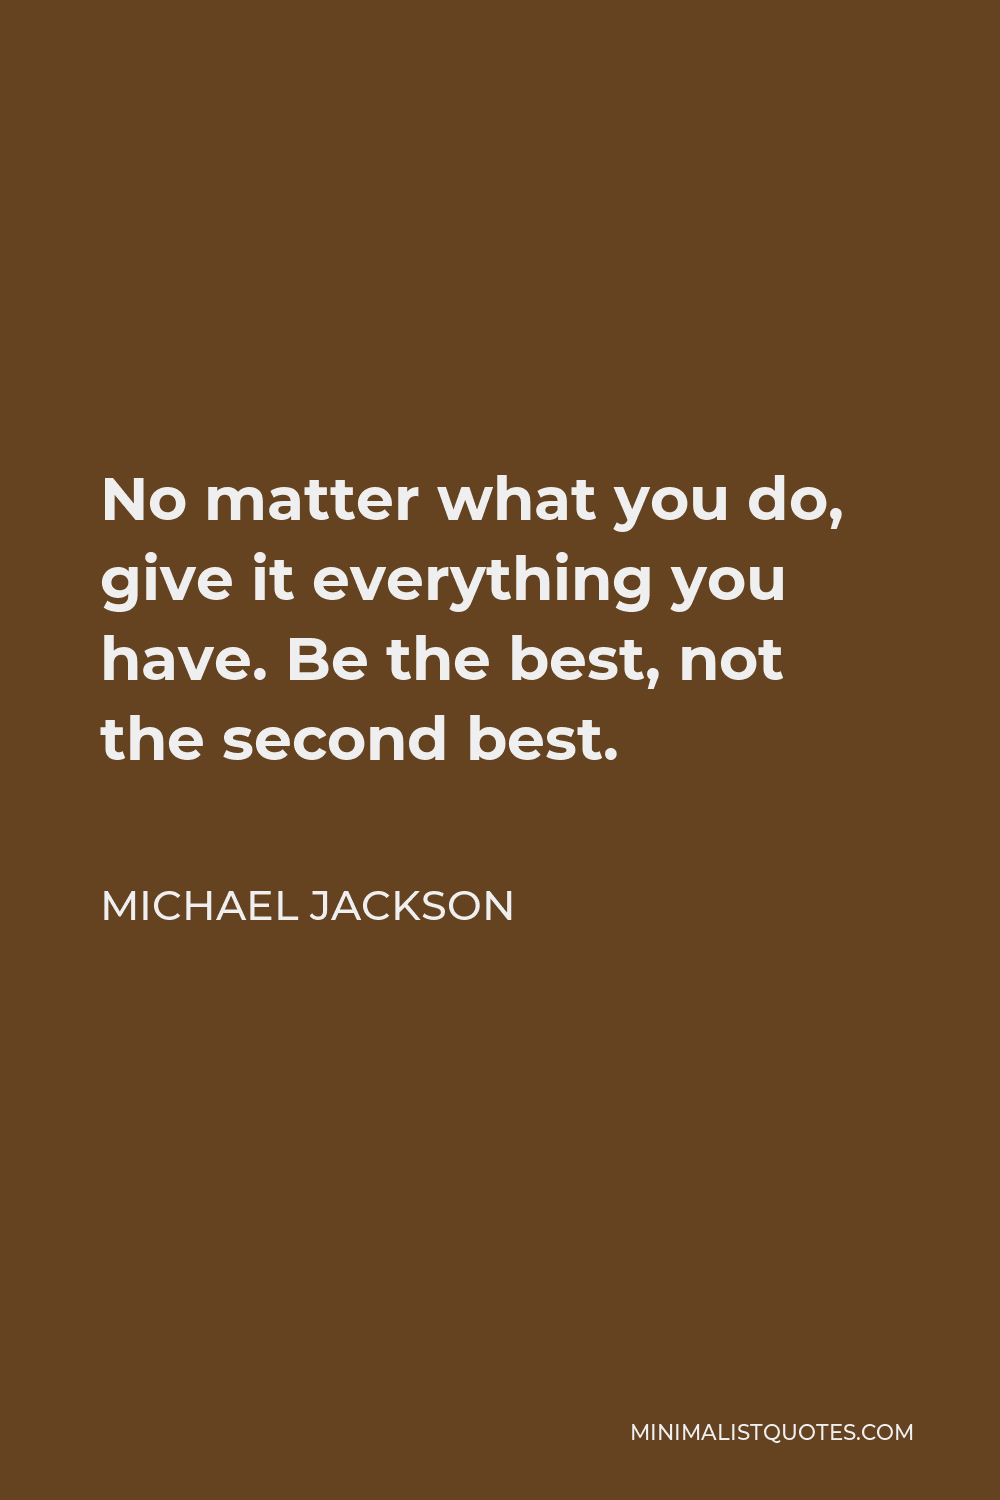 Michael Jackson Quote - No matter what you do, give it everything you have. Be the best, not the second best.